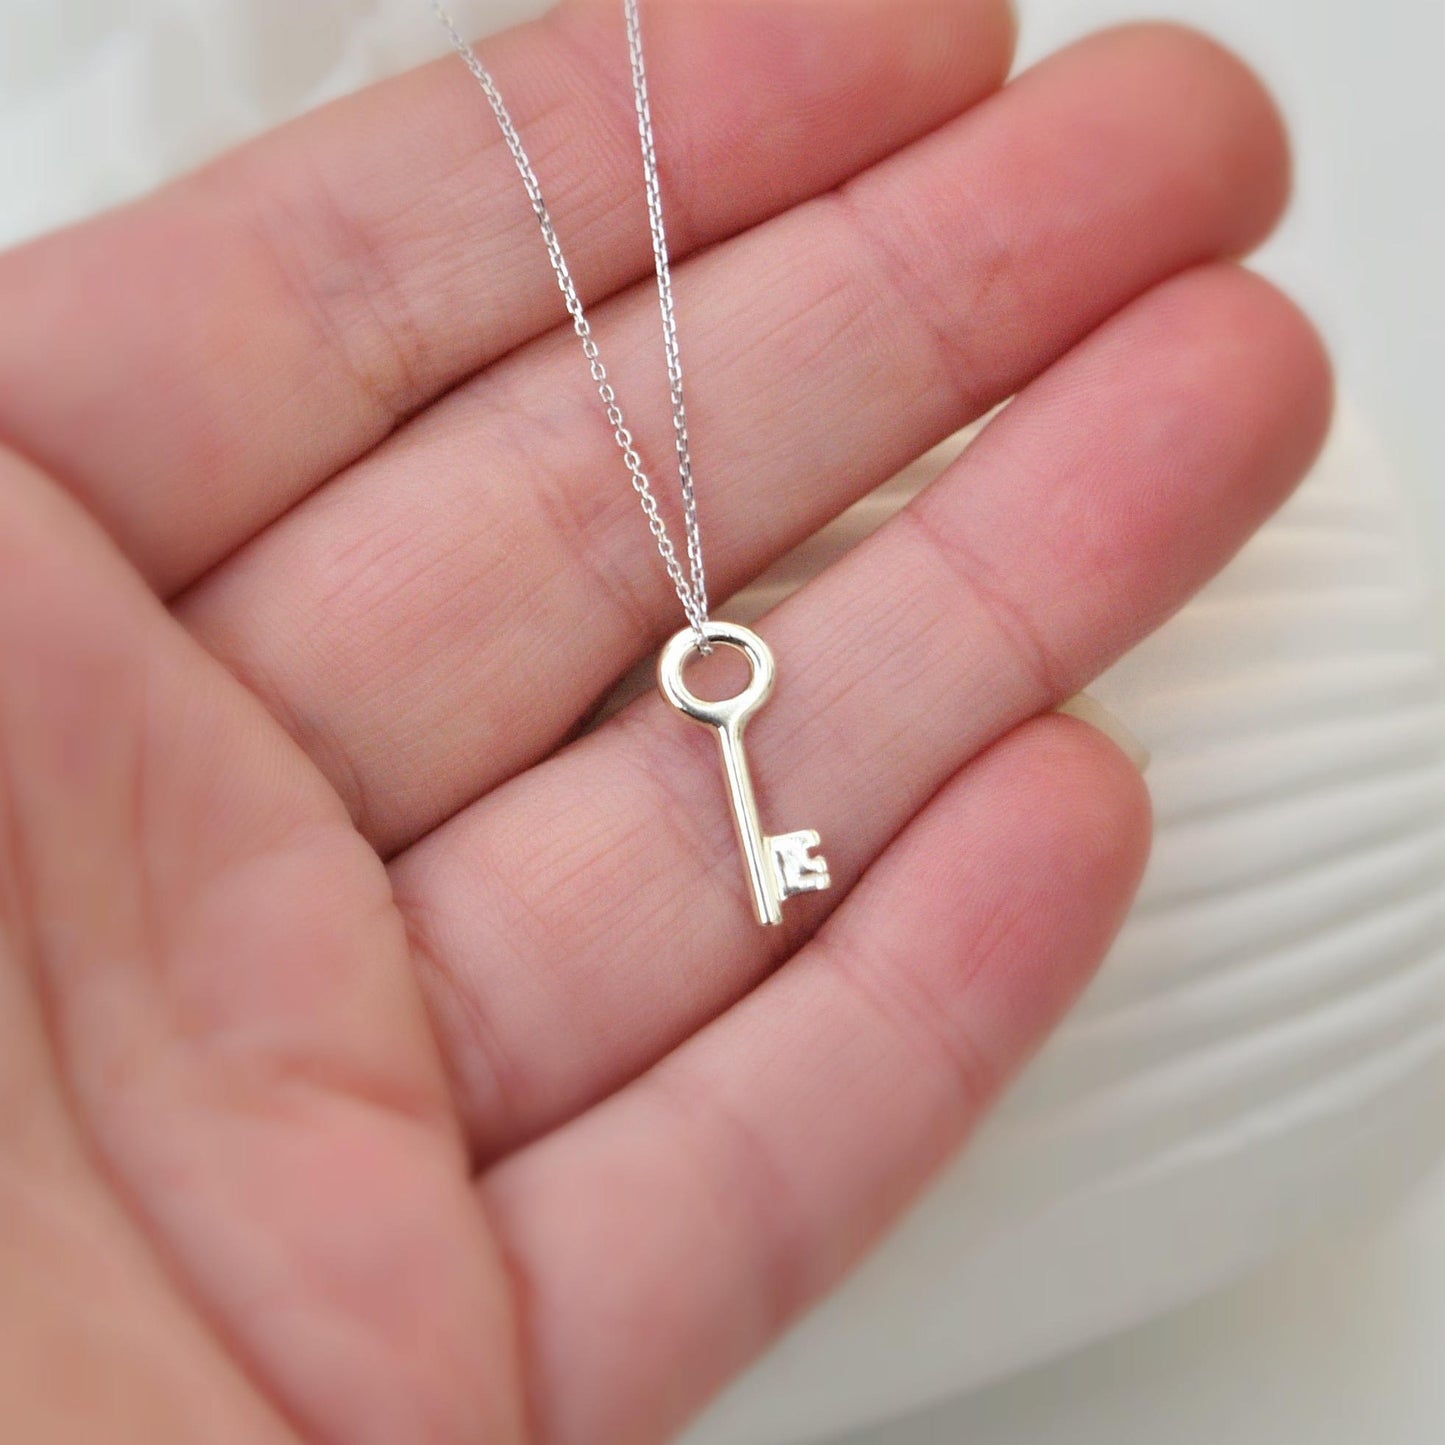 9ct solid white gold small and dainty key charm pendant and chain